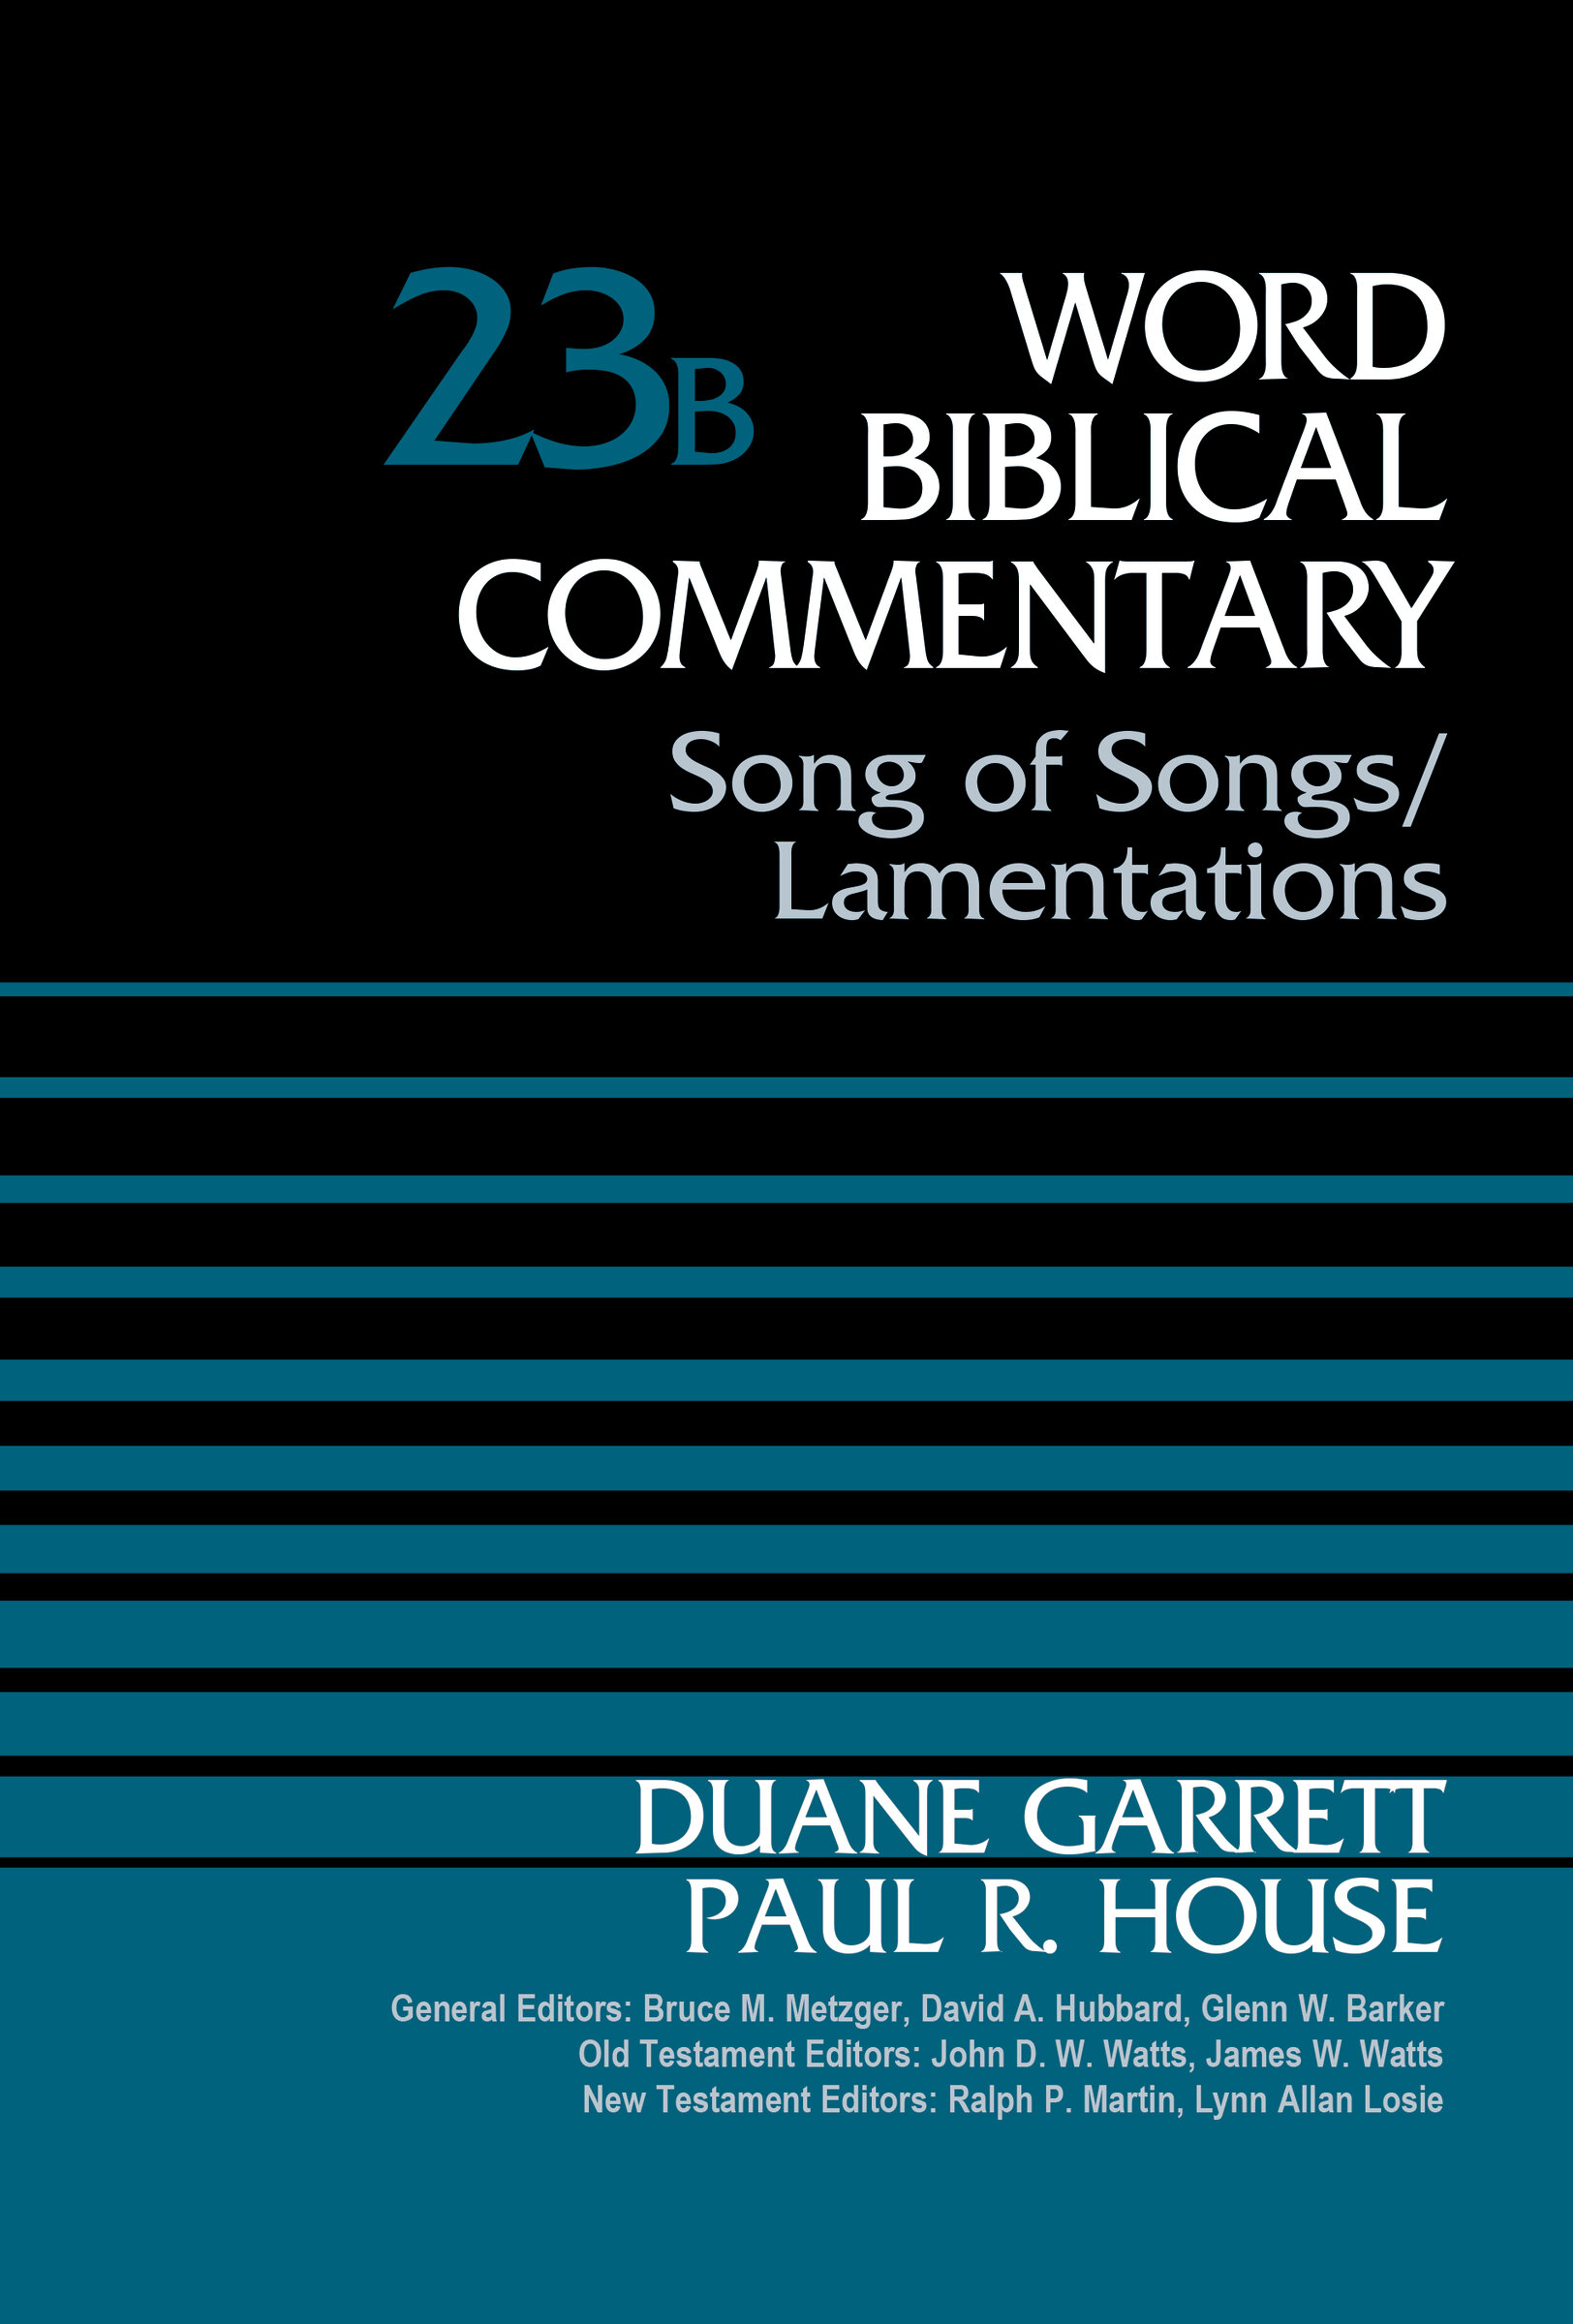 Song of Songs/Lamentations (Word Biblical Commentary, Volume 23b | WBC)